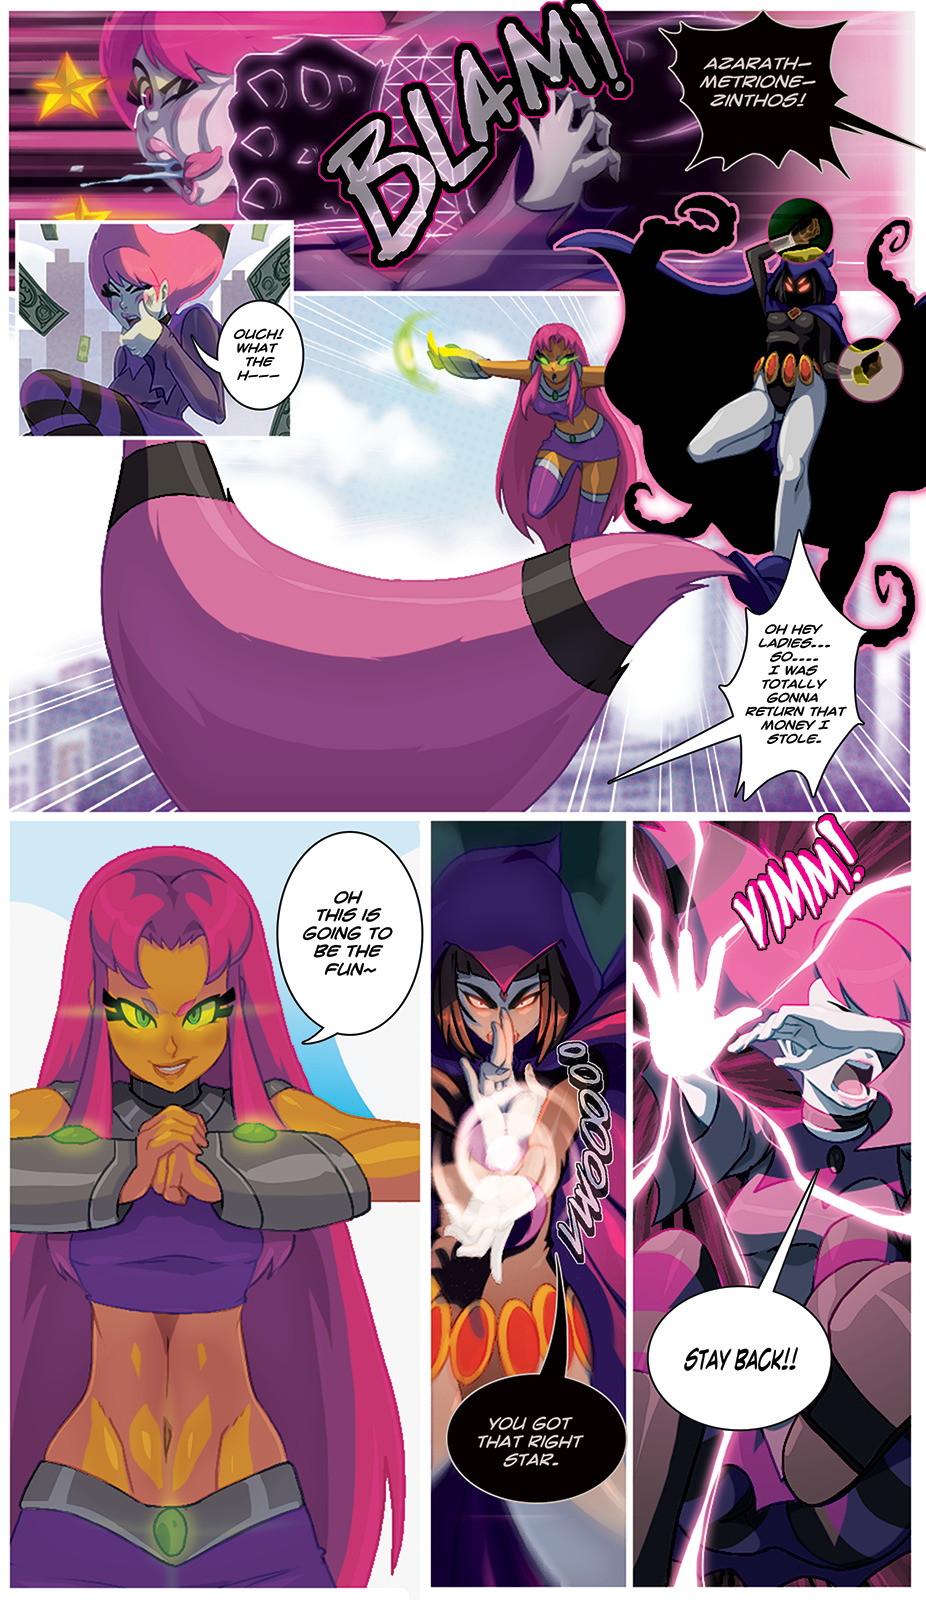 tovio-rogers:“Jinxed” a 3 page short commissioned kamenrider1 on deviantart